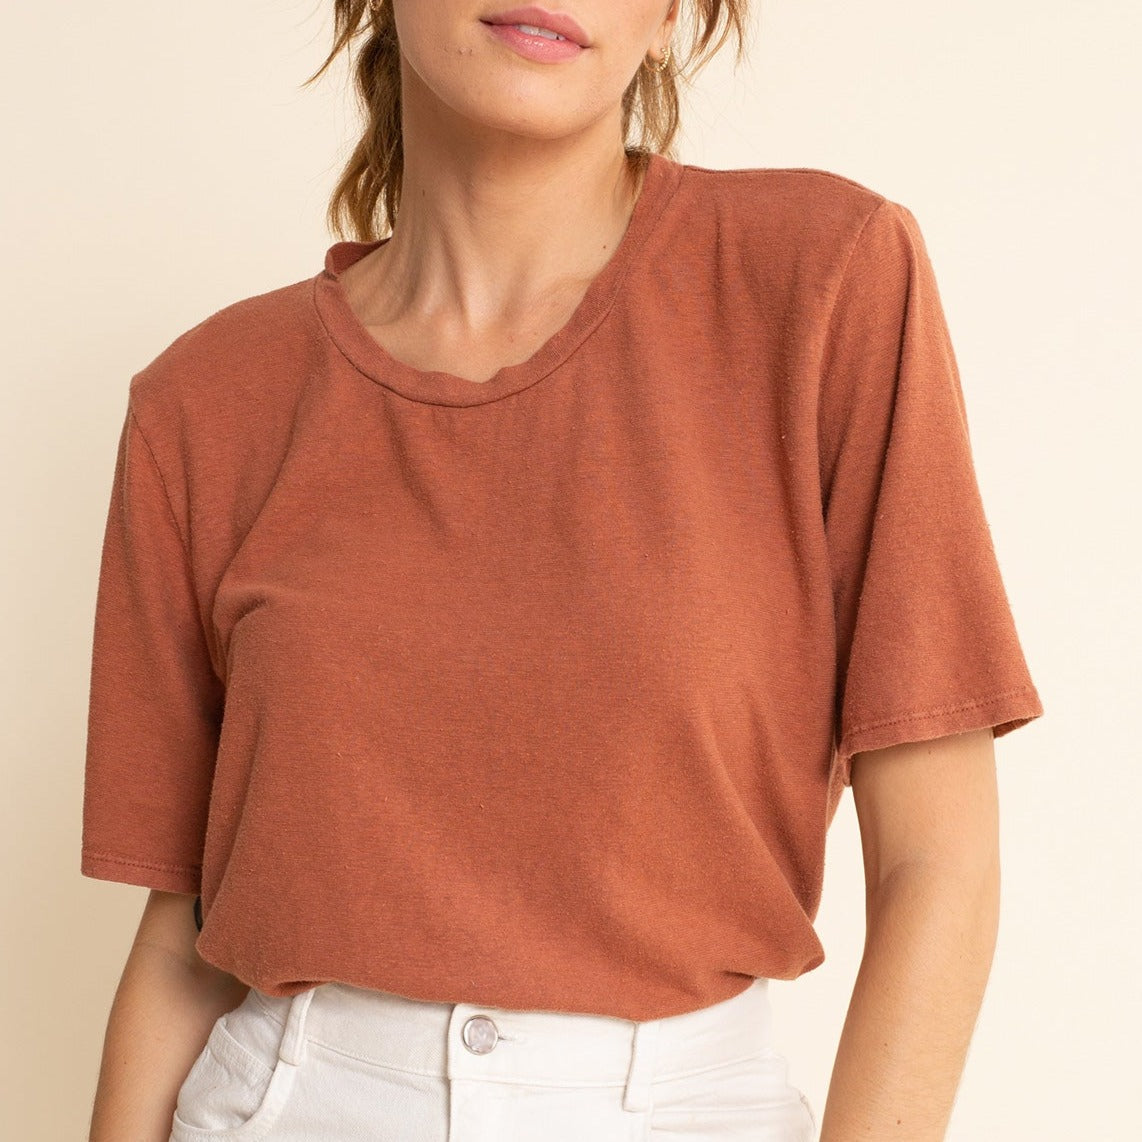 Silverlake Cropped Tee In Washed White By Jungmaven